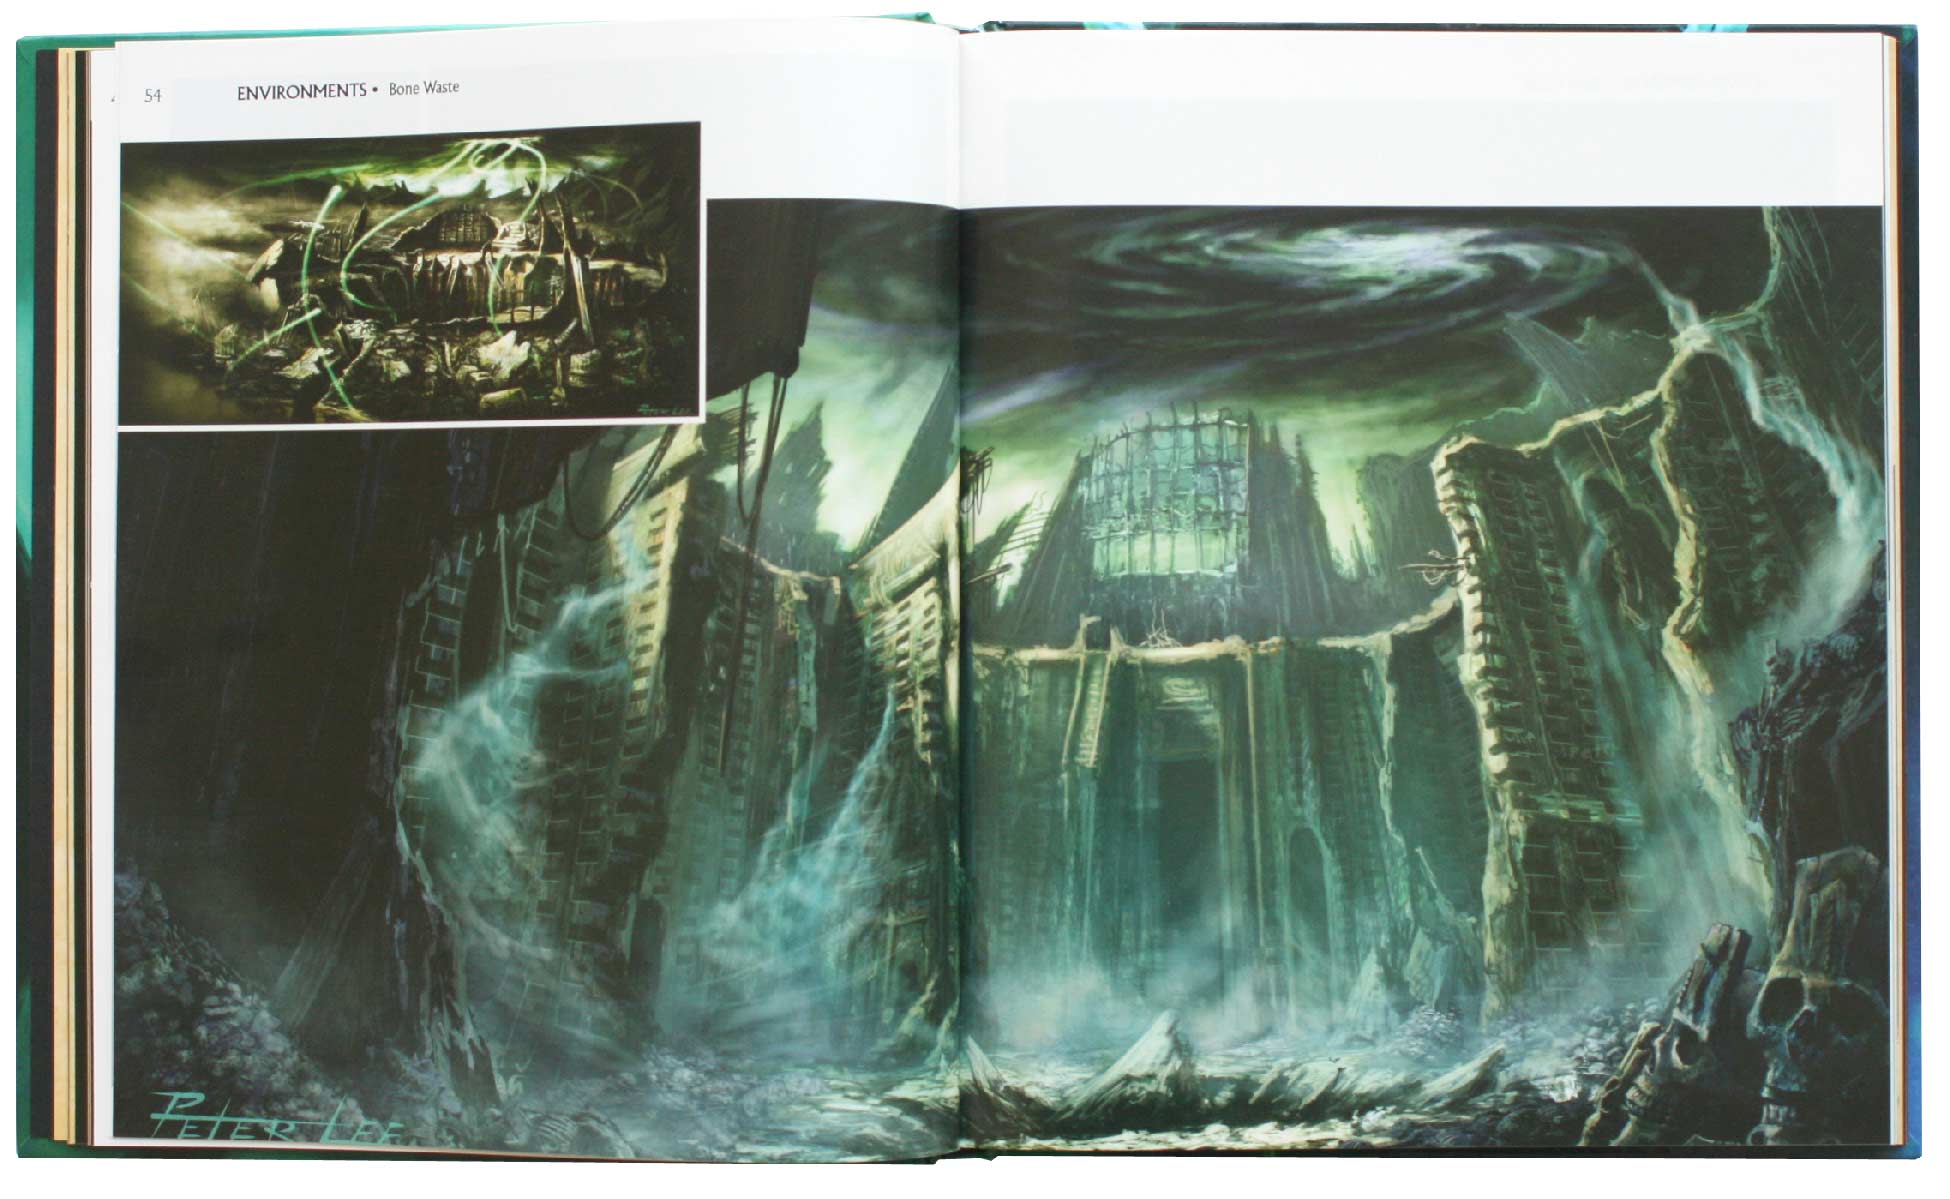 Page 54 et 55 de l'Art book : The Art of the Burning Crusade (World of Warcraft)